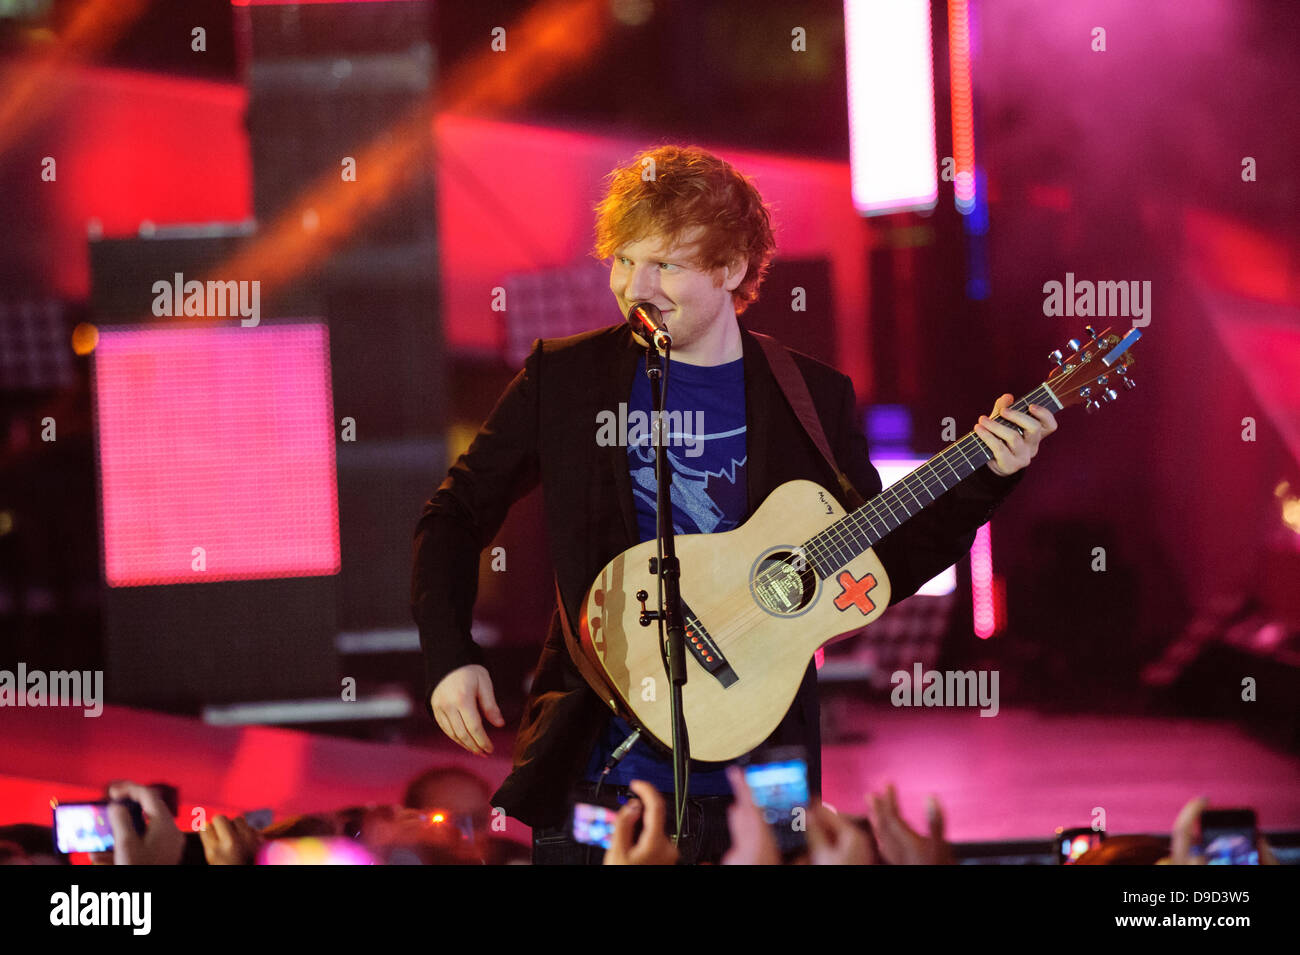 Tornoto, Canada. 16th Jun 2013. Ed Sheeran performs at the 2013 MMVA in Toronto Canada. The MuchMusic Video Awards took over the trendy Queen West village in Toronto for an award show featuring PSY and other super stars including Avril Lavigne, Demi Lovato, Serena Ryder, Ed Sheeran, Marianas Trench, Classified, and Armin Van Buuren with Trevor Guthrie. Credit:  Victor Biro/Alamy Live News Stock Photo